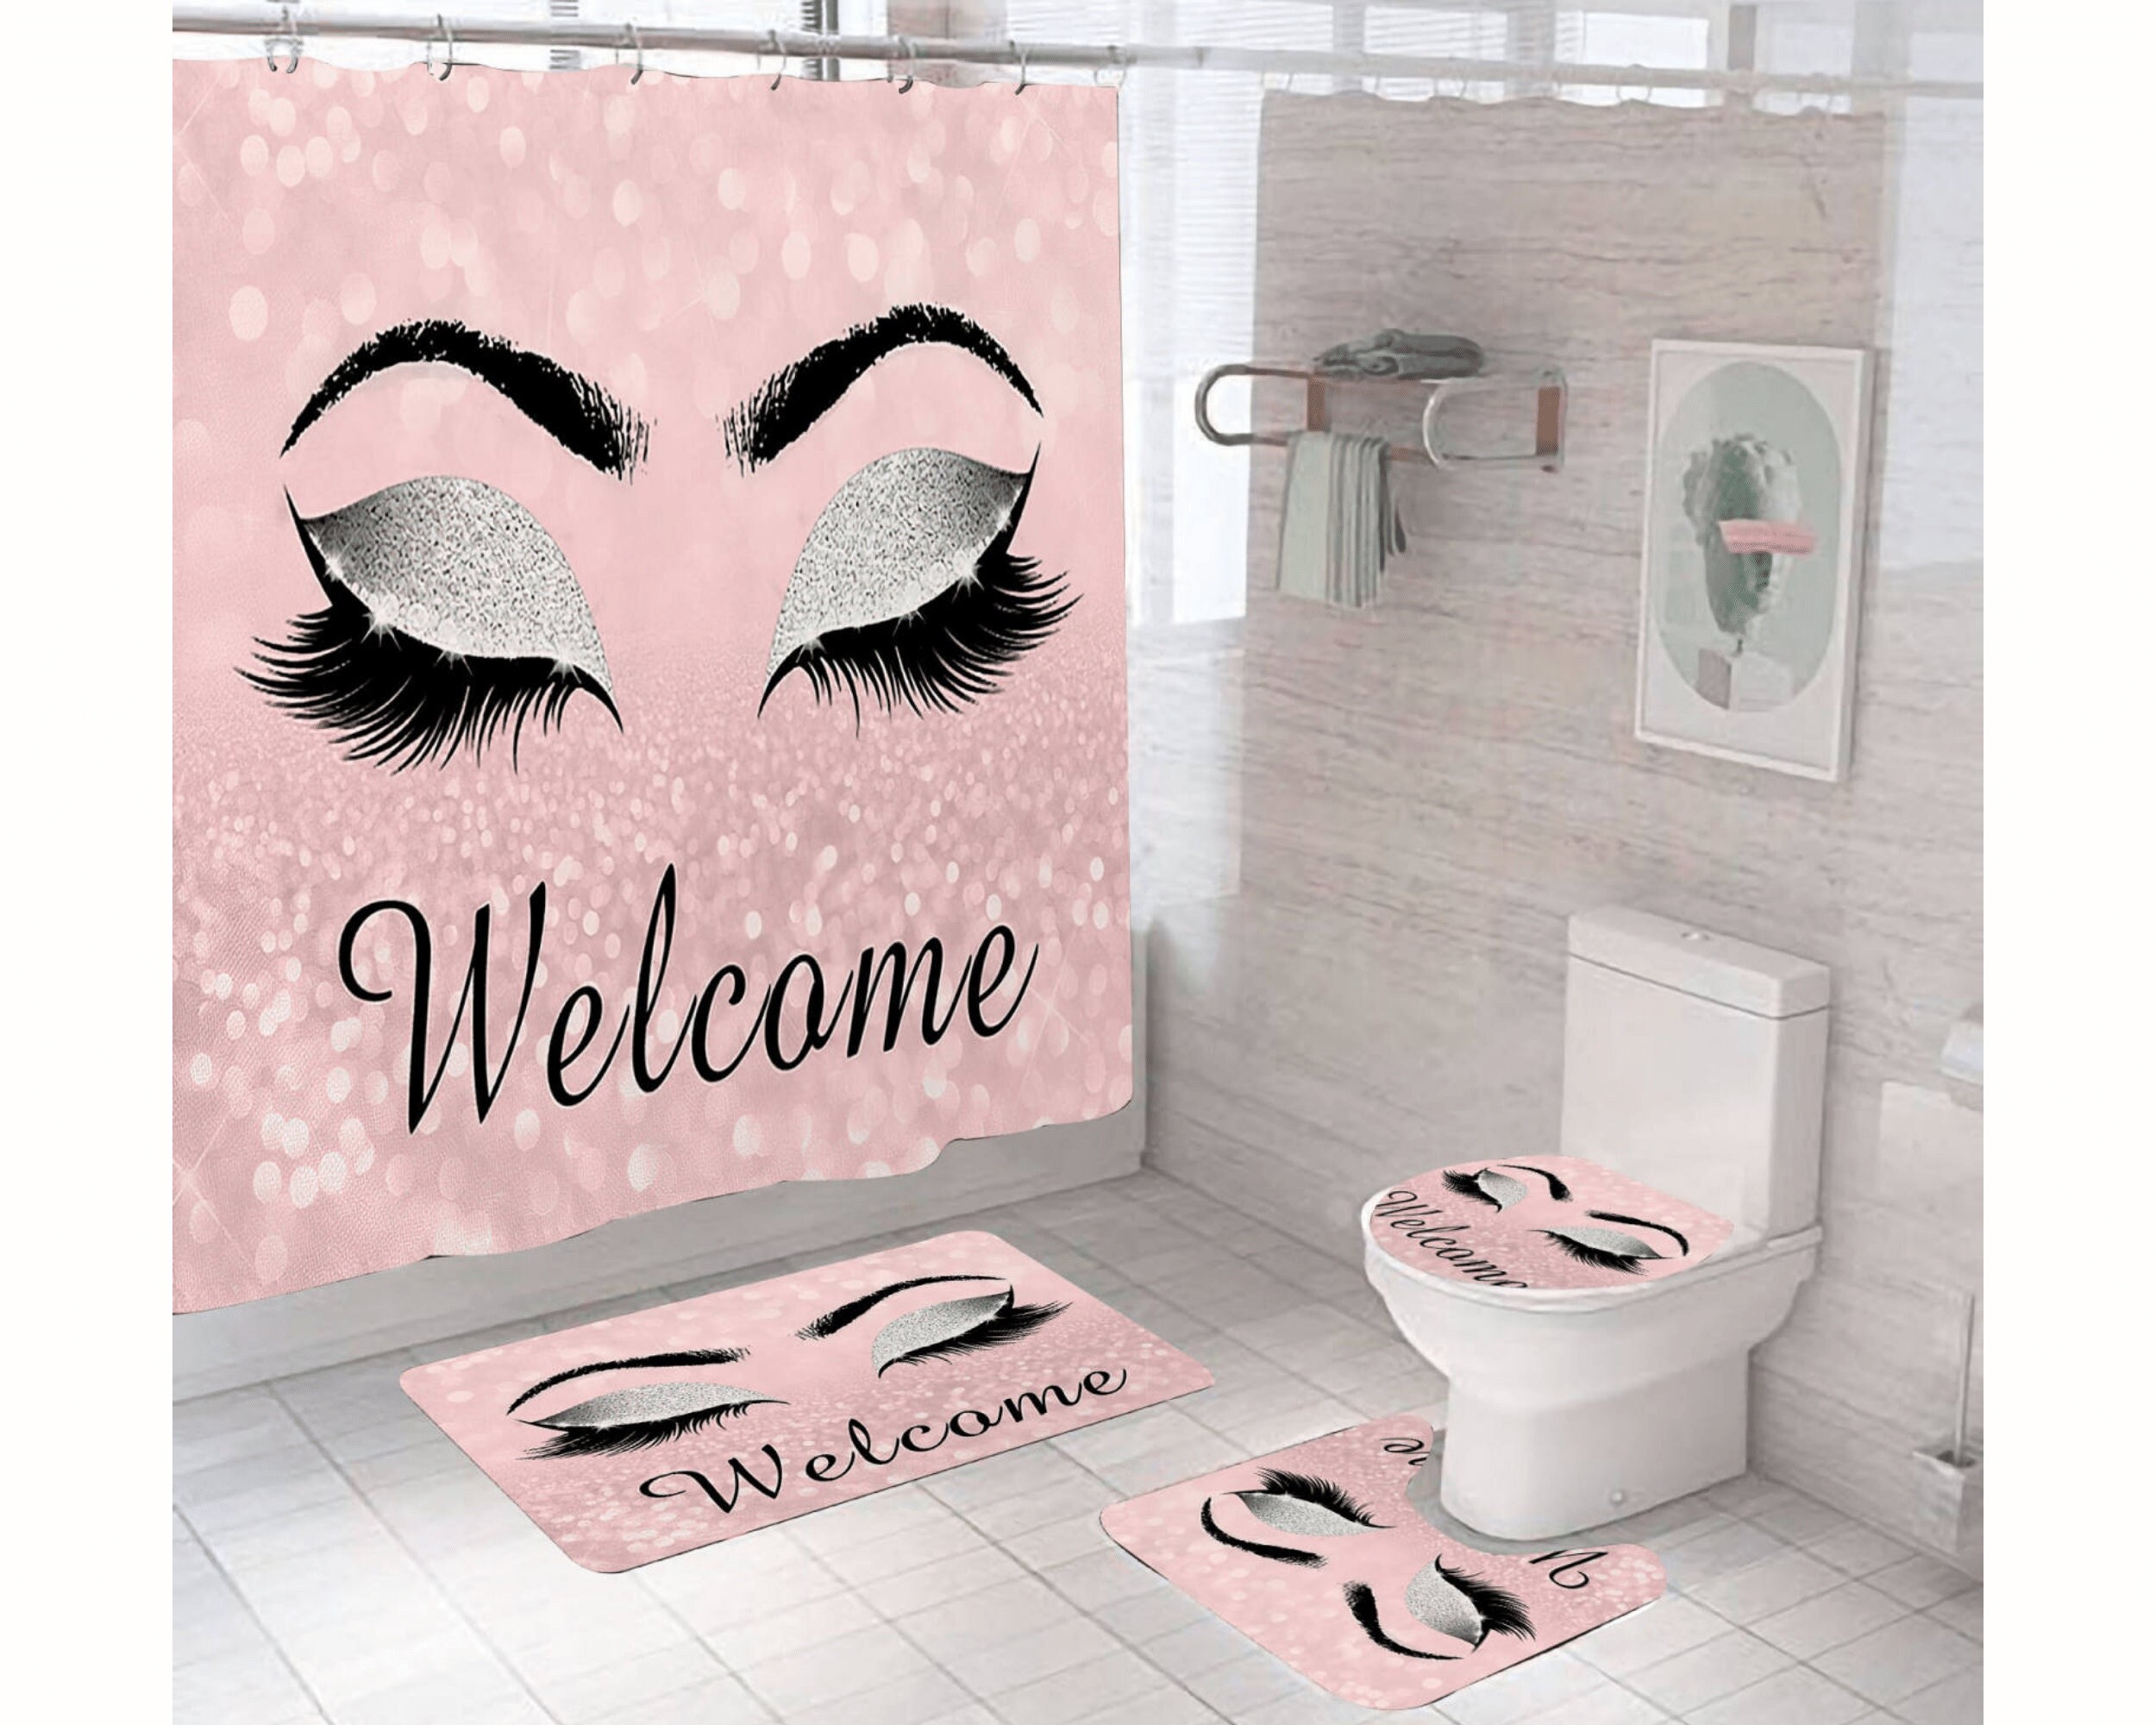 Gucci Luxury Bathroom Set White Black And Beige - Shower Curtain And Rug  Toilet Seat Lid Covers Bathroom Set - Infinite Creativity. Spend Less.  Smile More